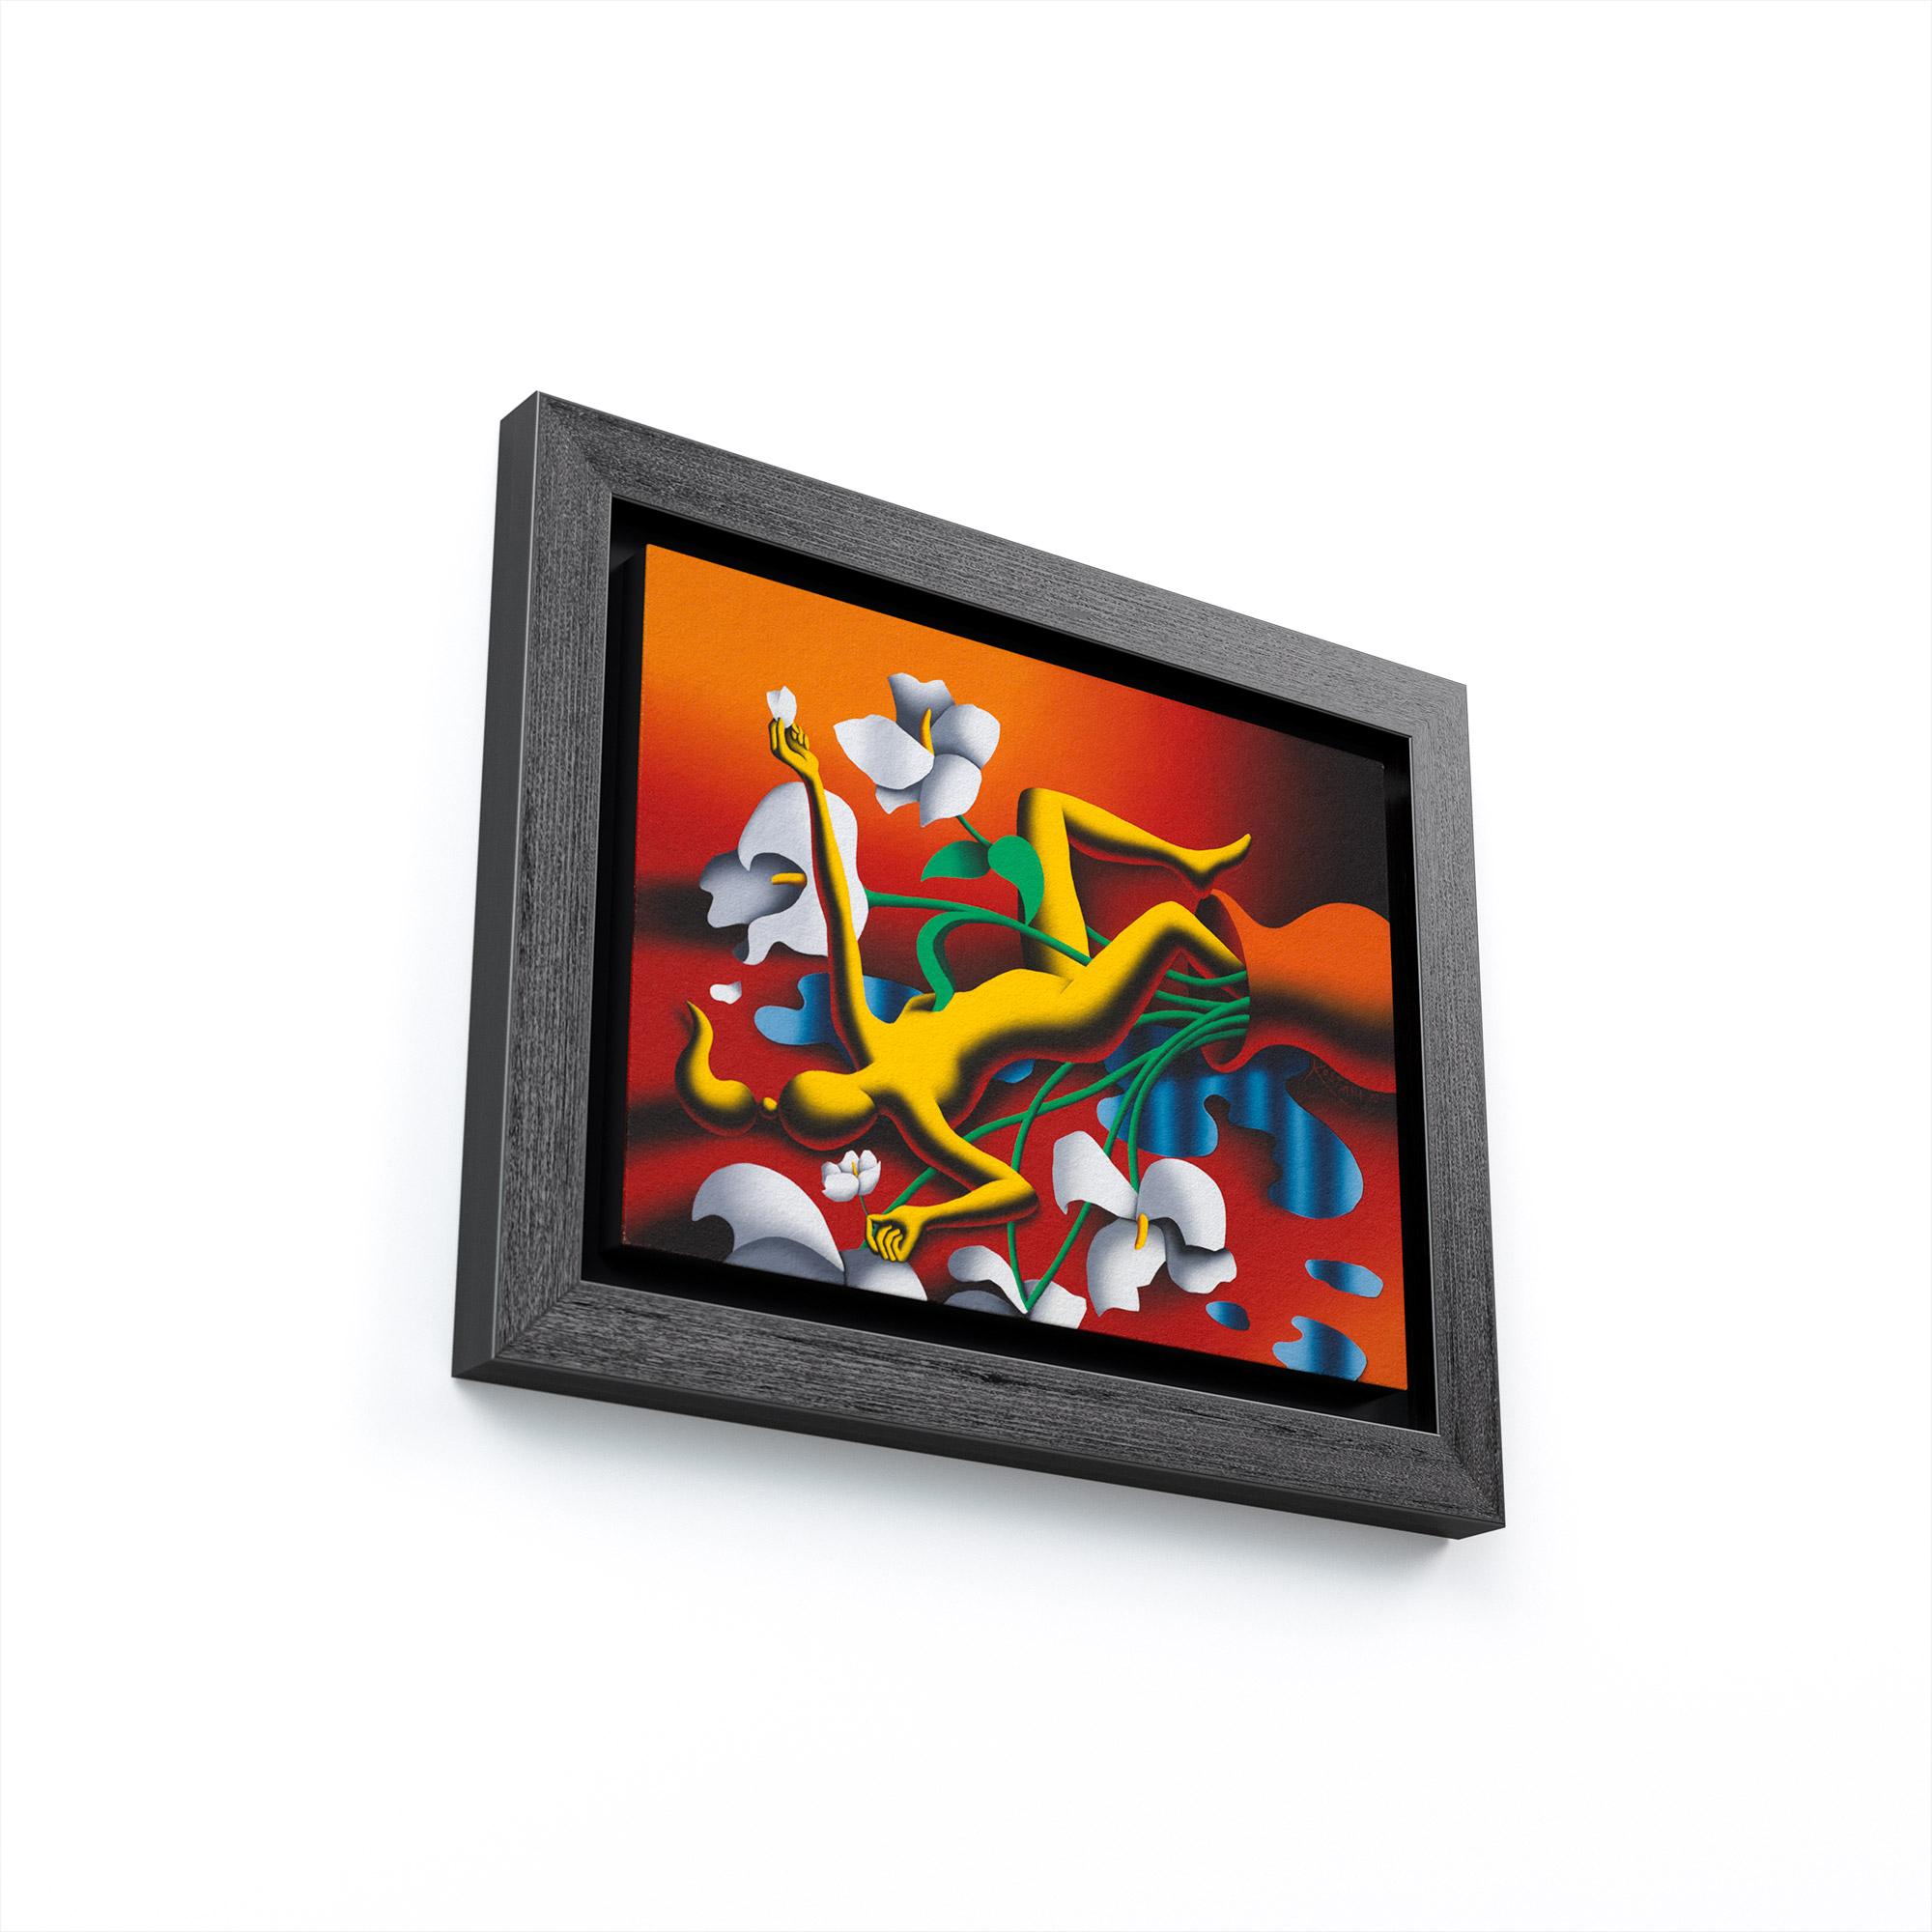 Golden are the Days of Memory - Black Figurative Painting by Mark Kostabi